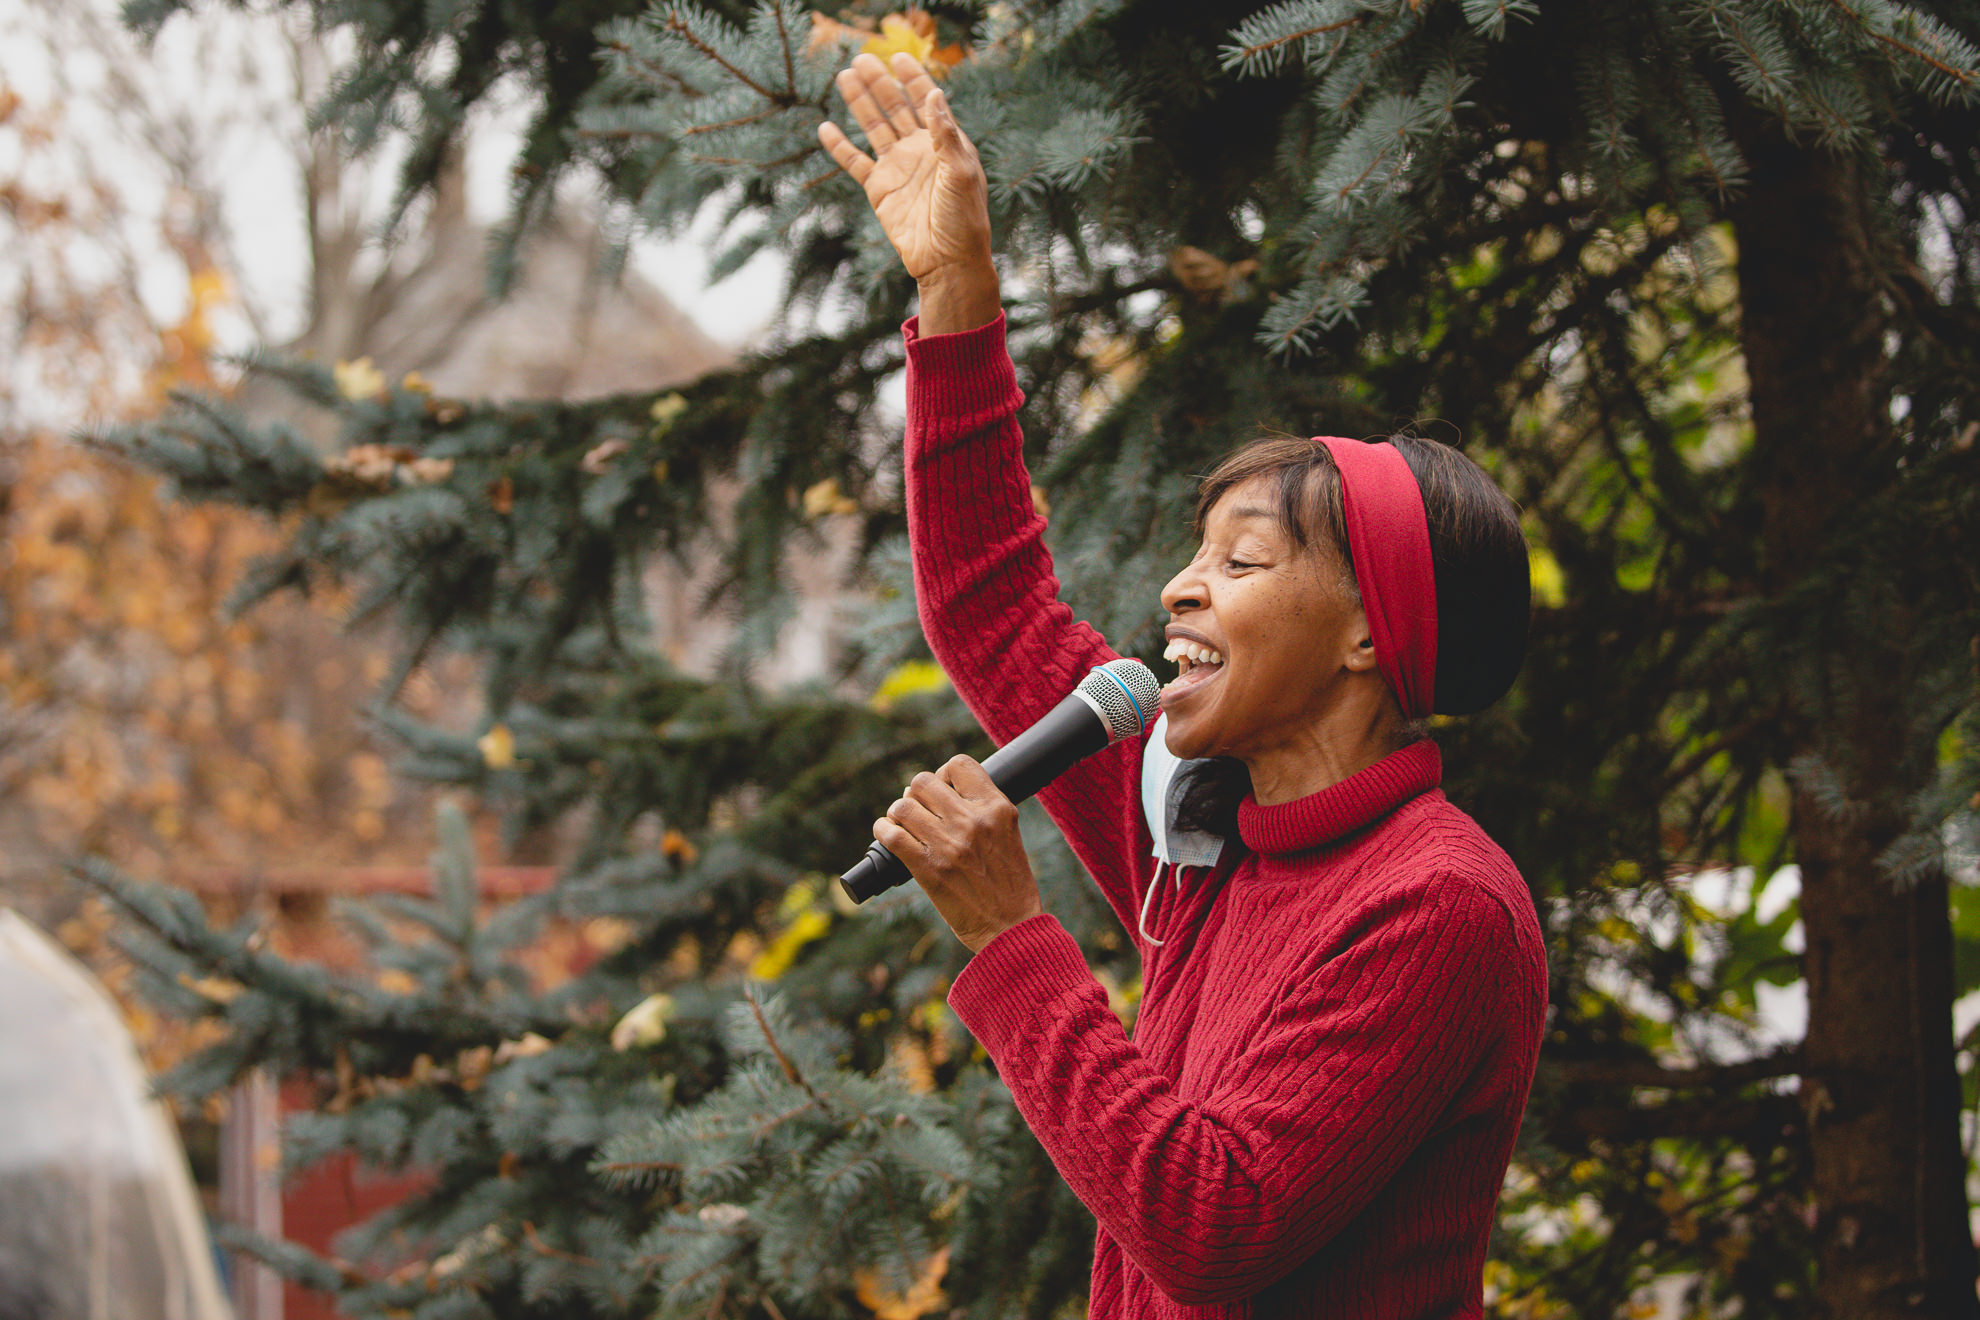 Sister Jenthia Abell leads a song during a training session as part of an outreach program to the Black community to increase vaccine trial participation in Rochester, New York